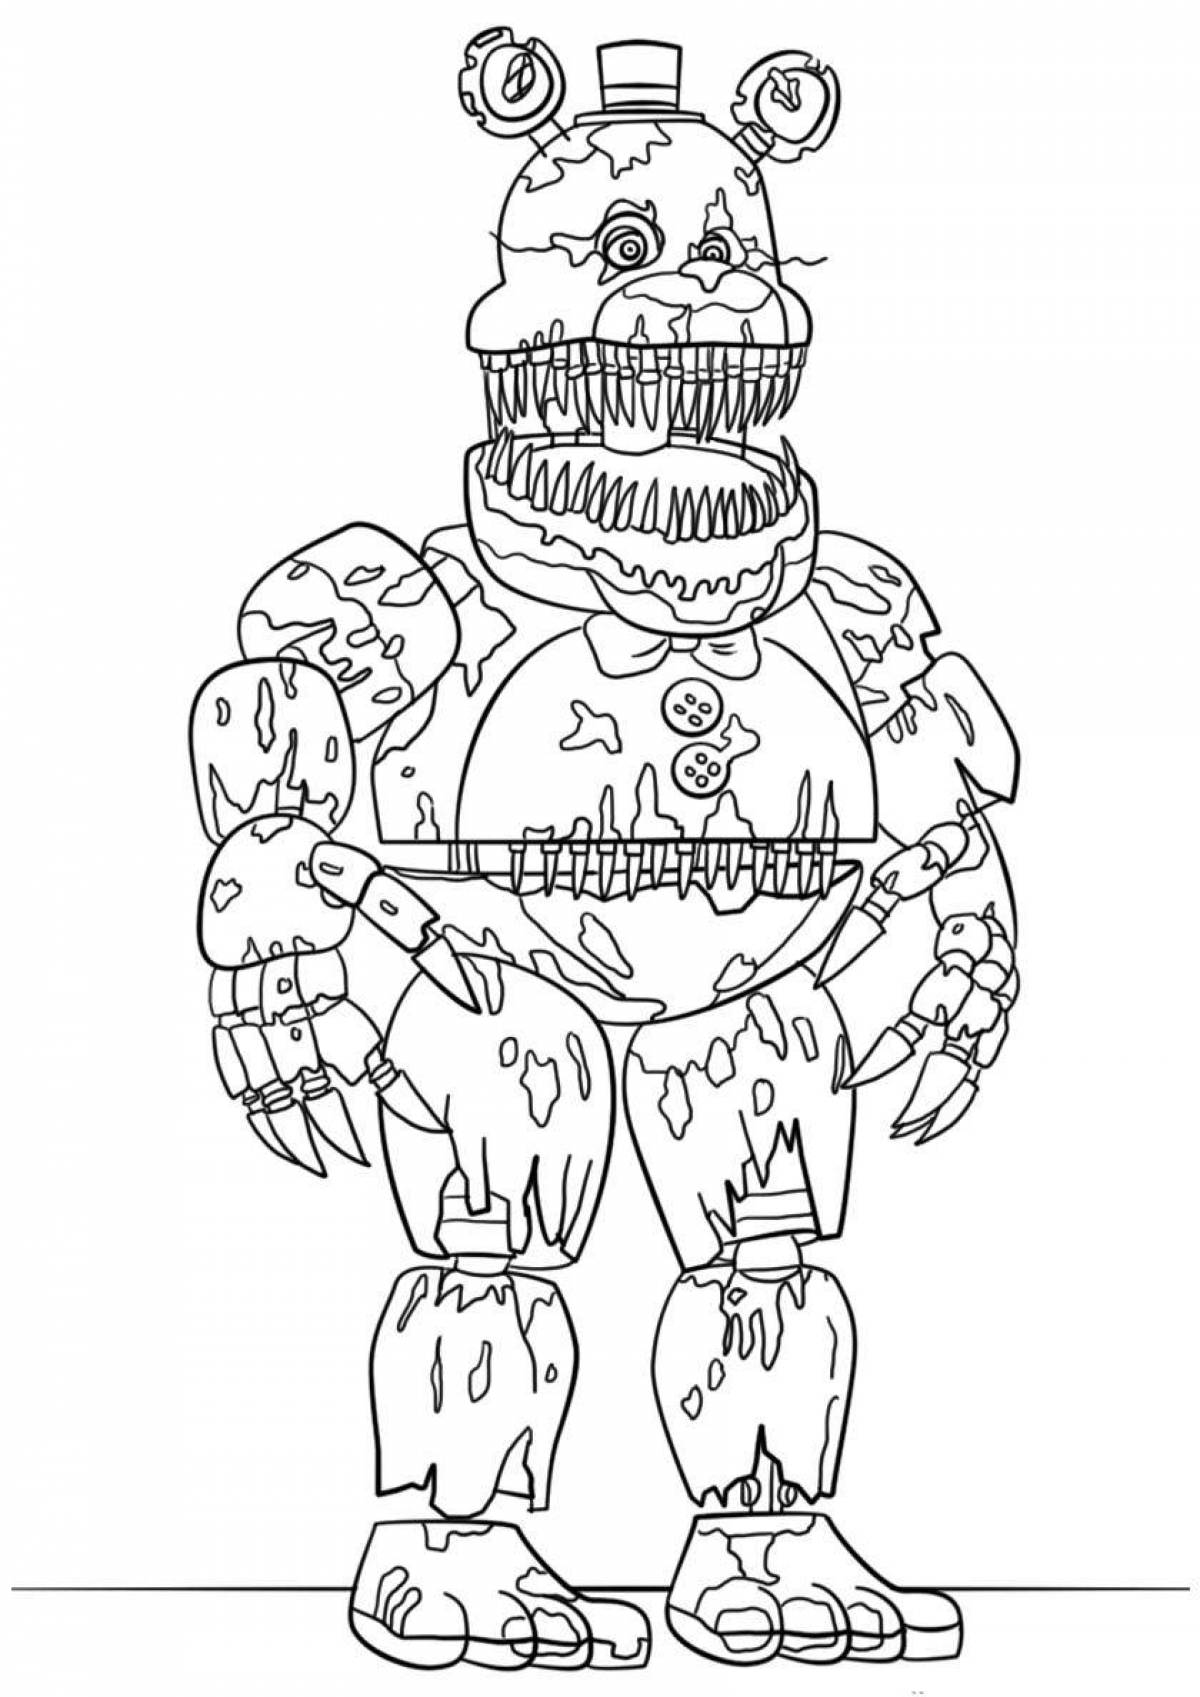 Grand lefty animatronic coloring book